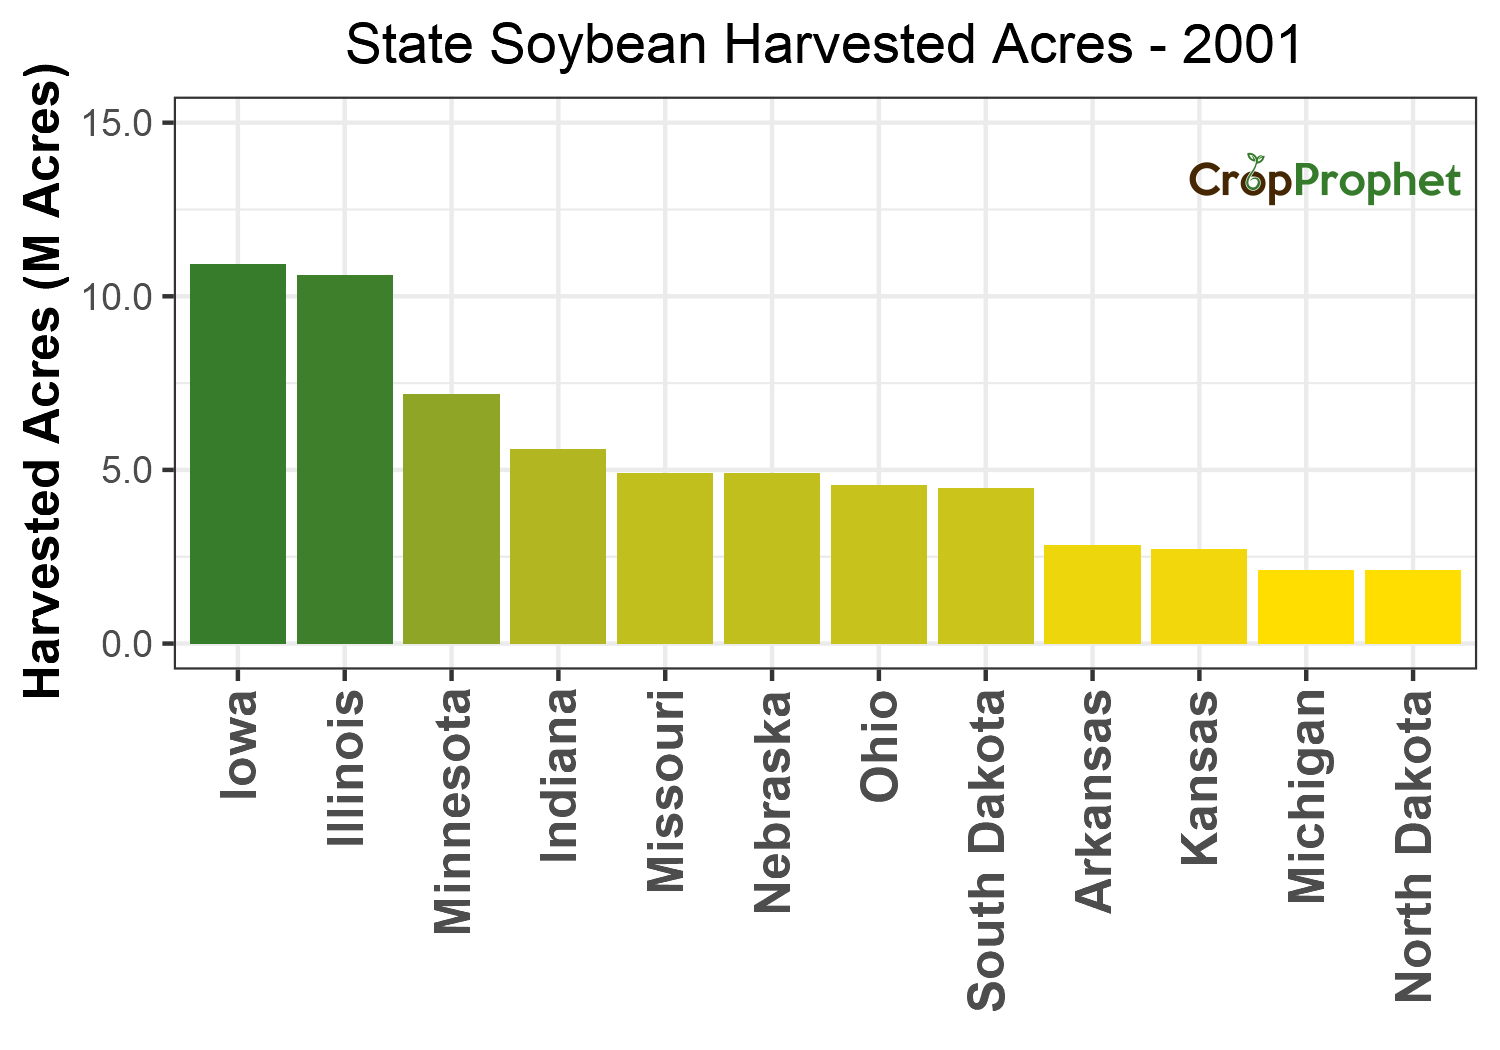 Soybean Harvested Acres by State - 2001 Rankings